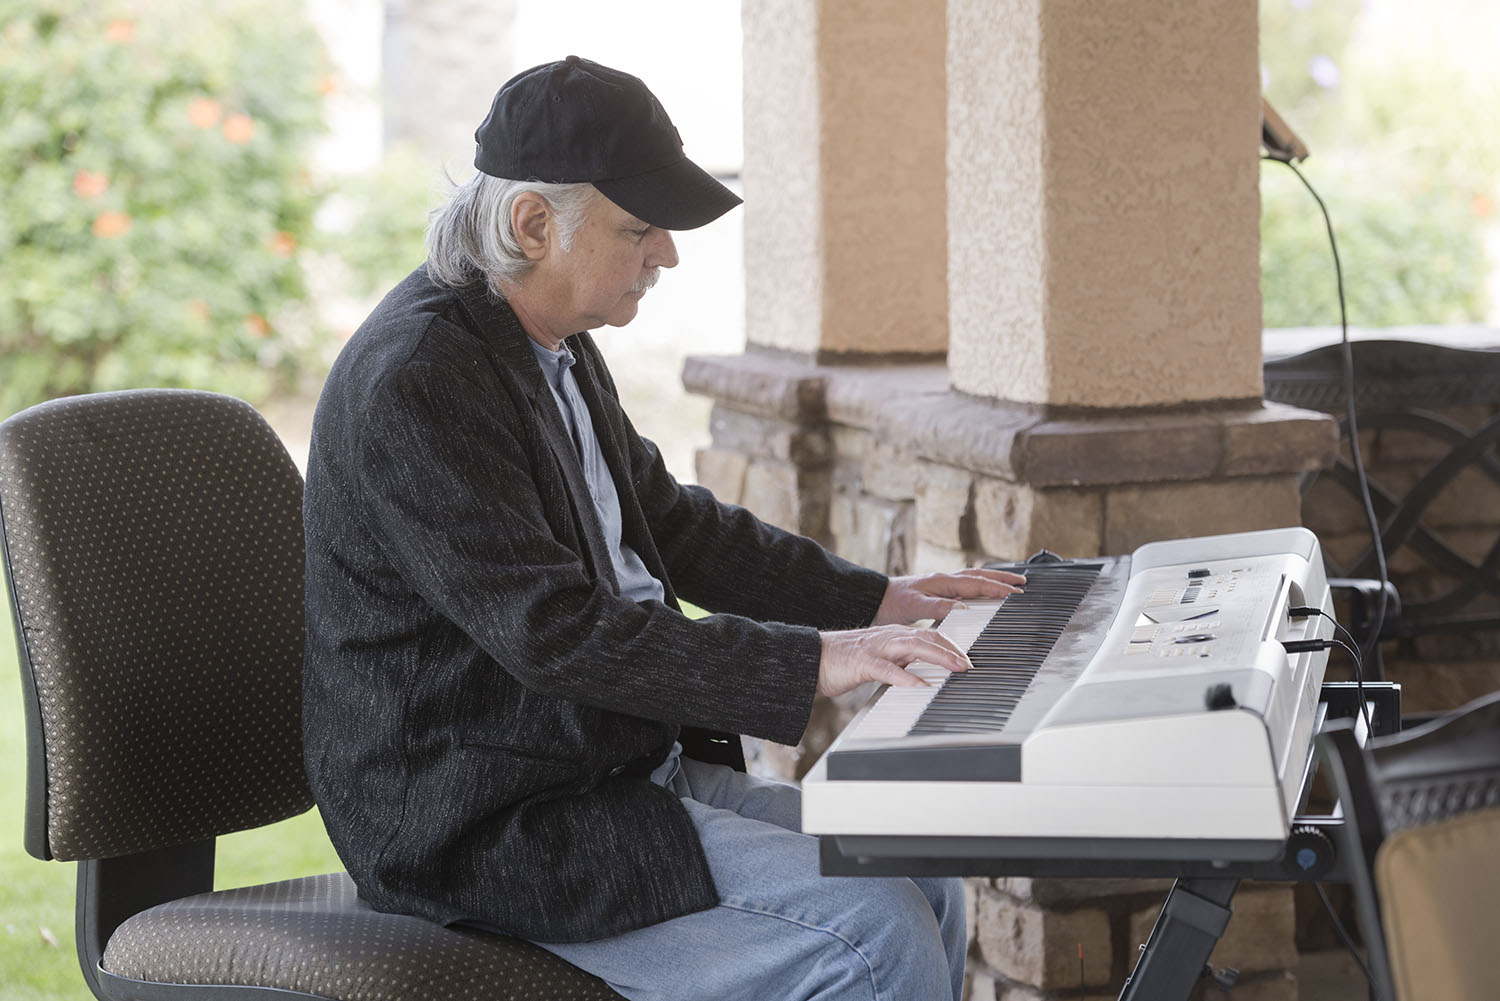 Brian playing the piano outside